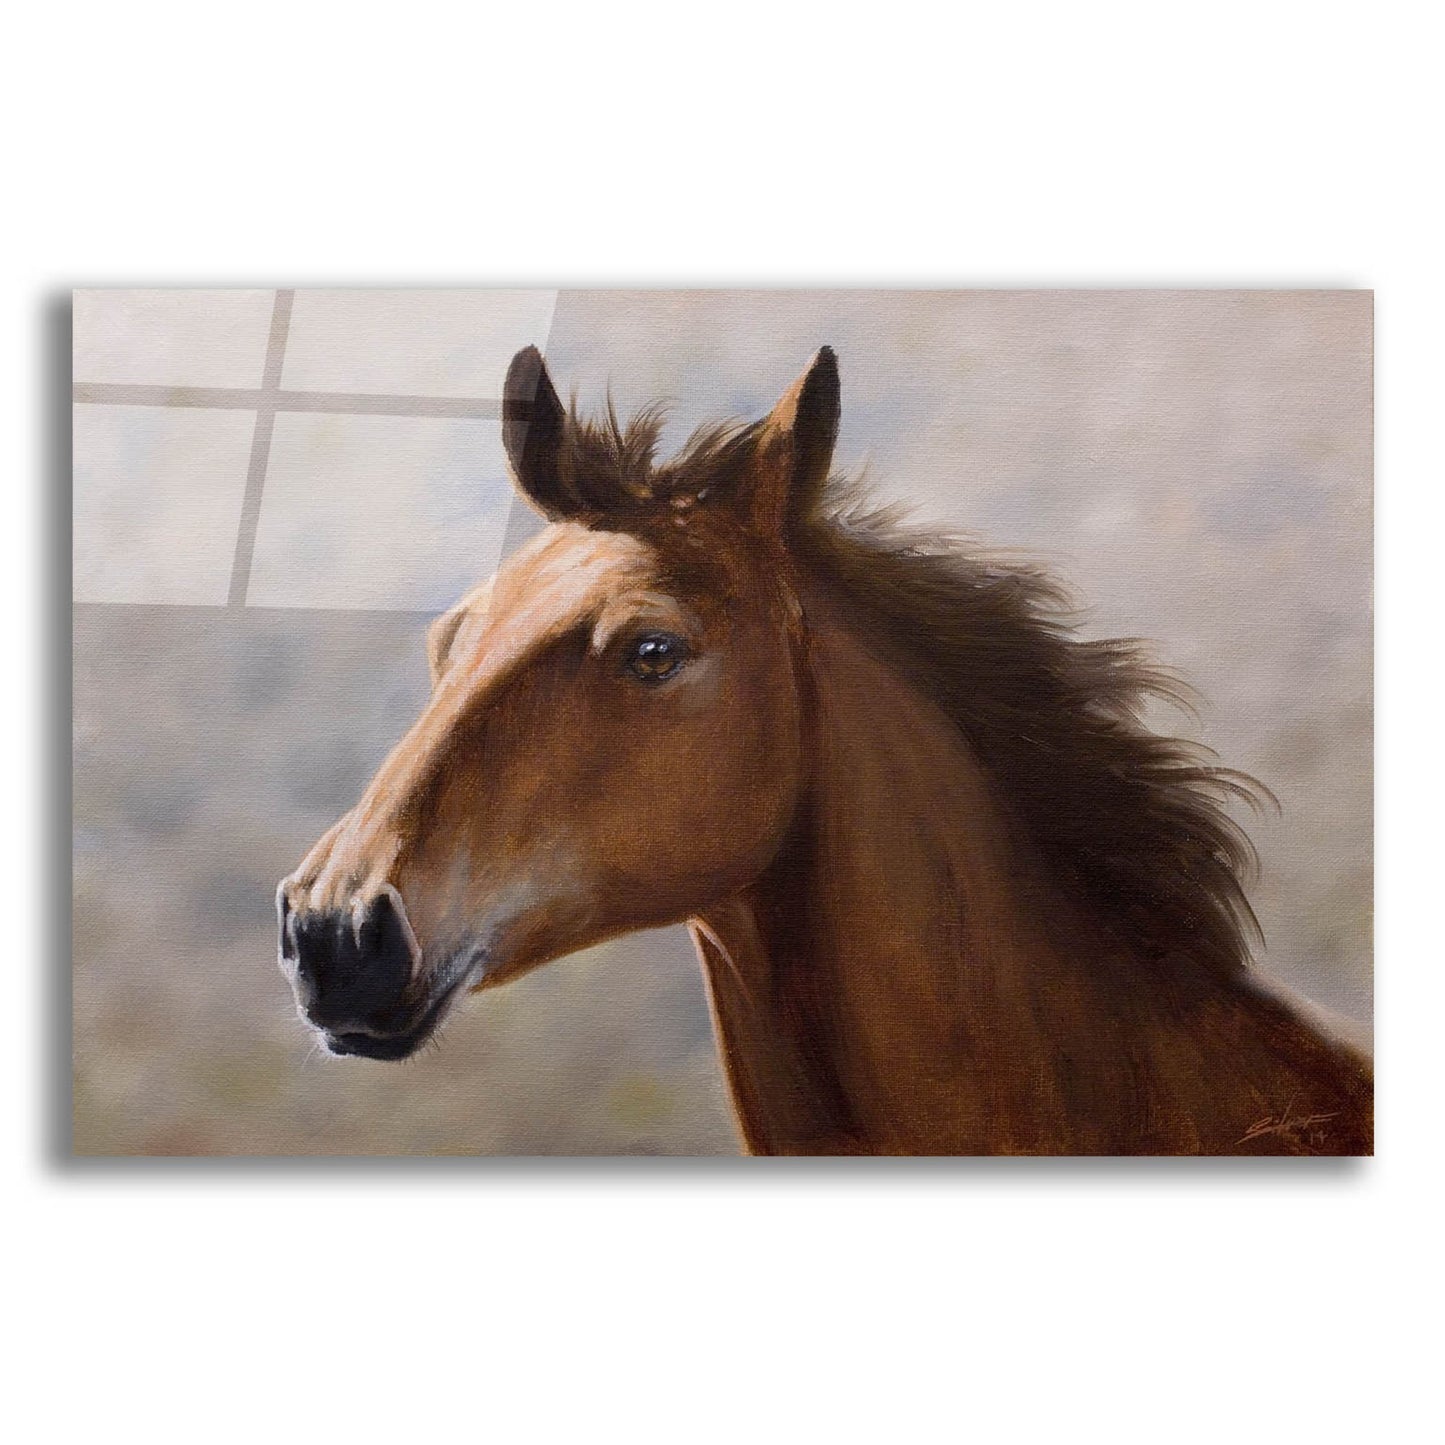 Epic Art 'Horse Thoughts' by John Silver, Acrylic Glass Wall Art,24x16